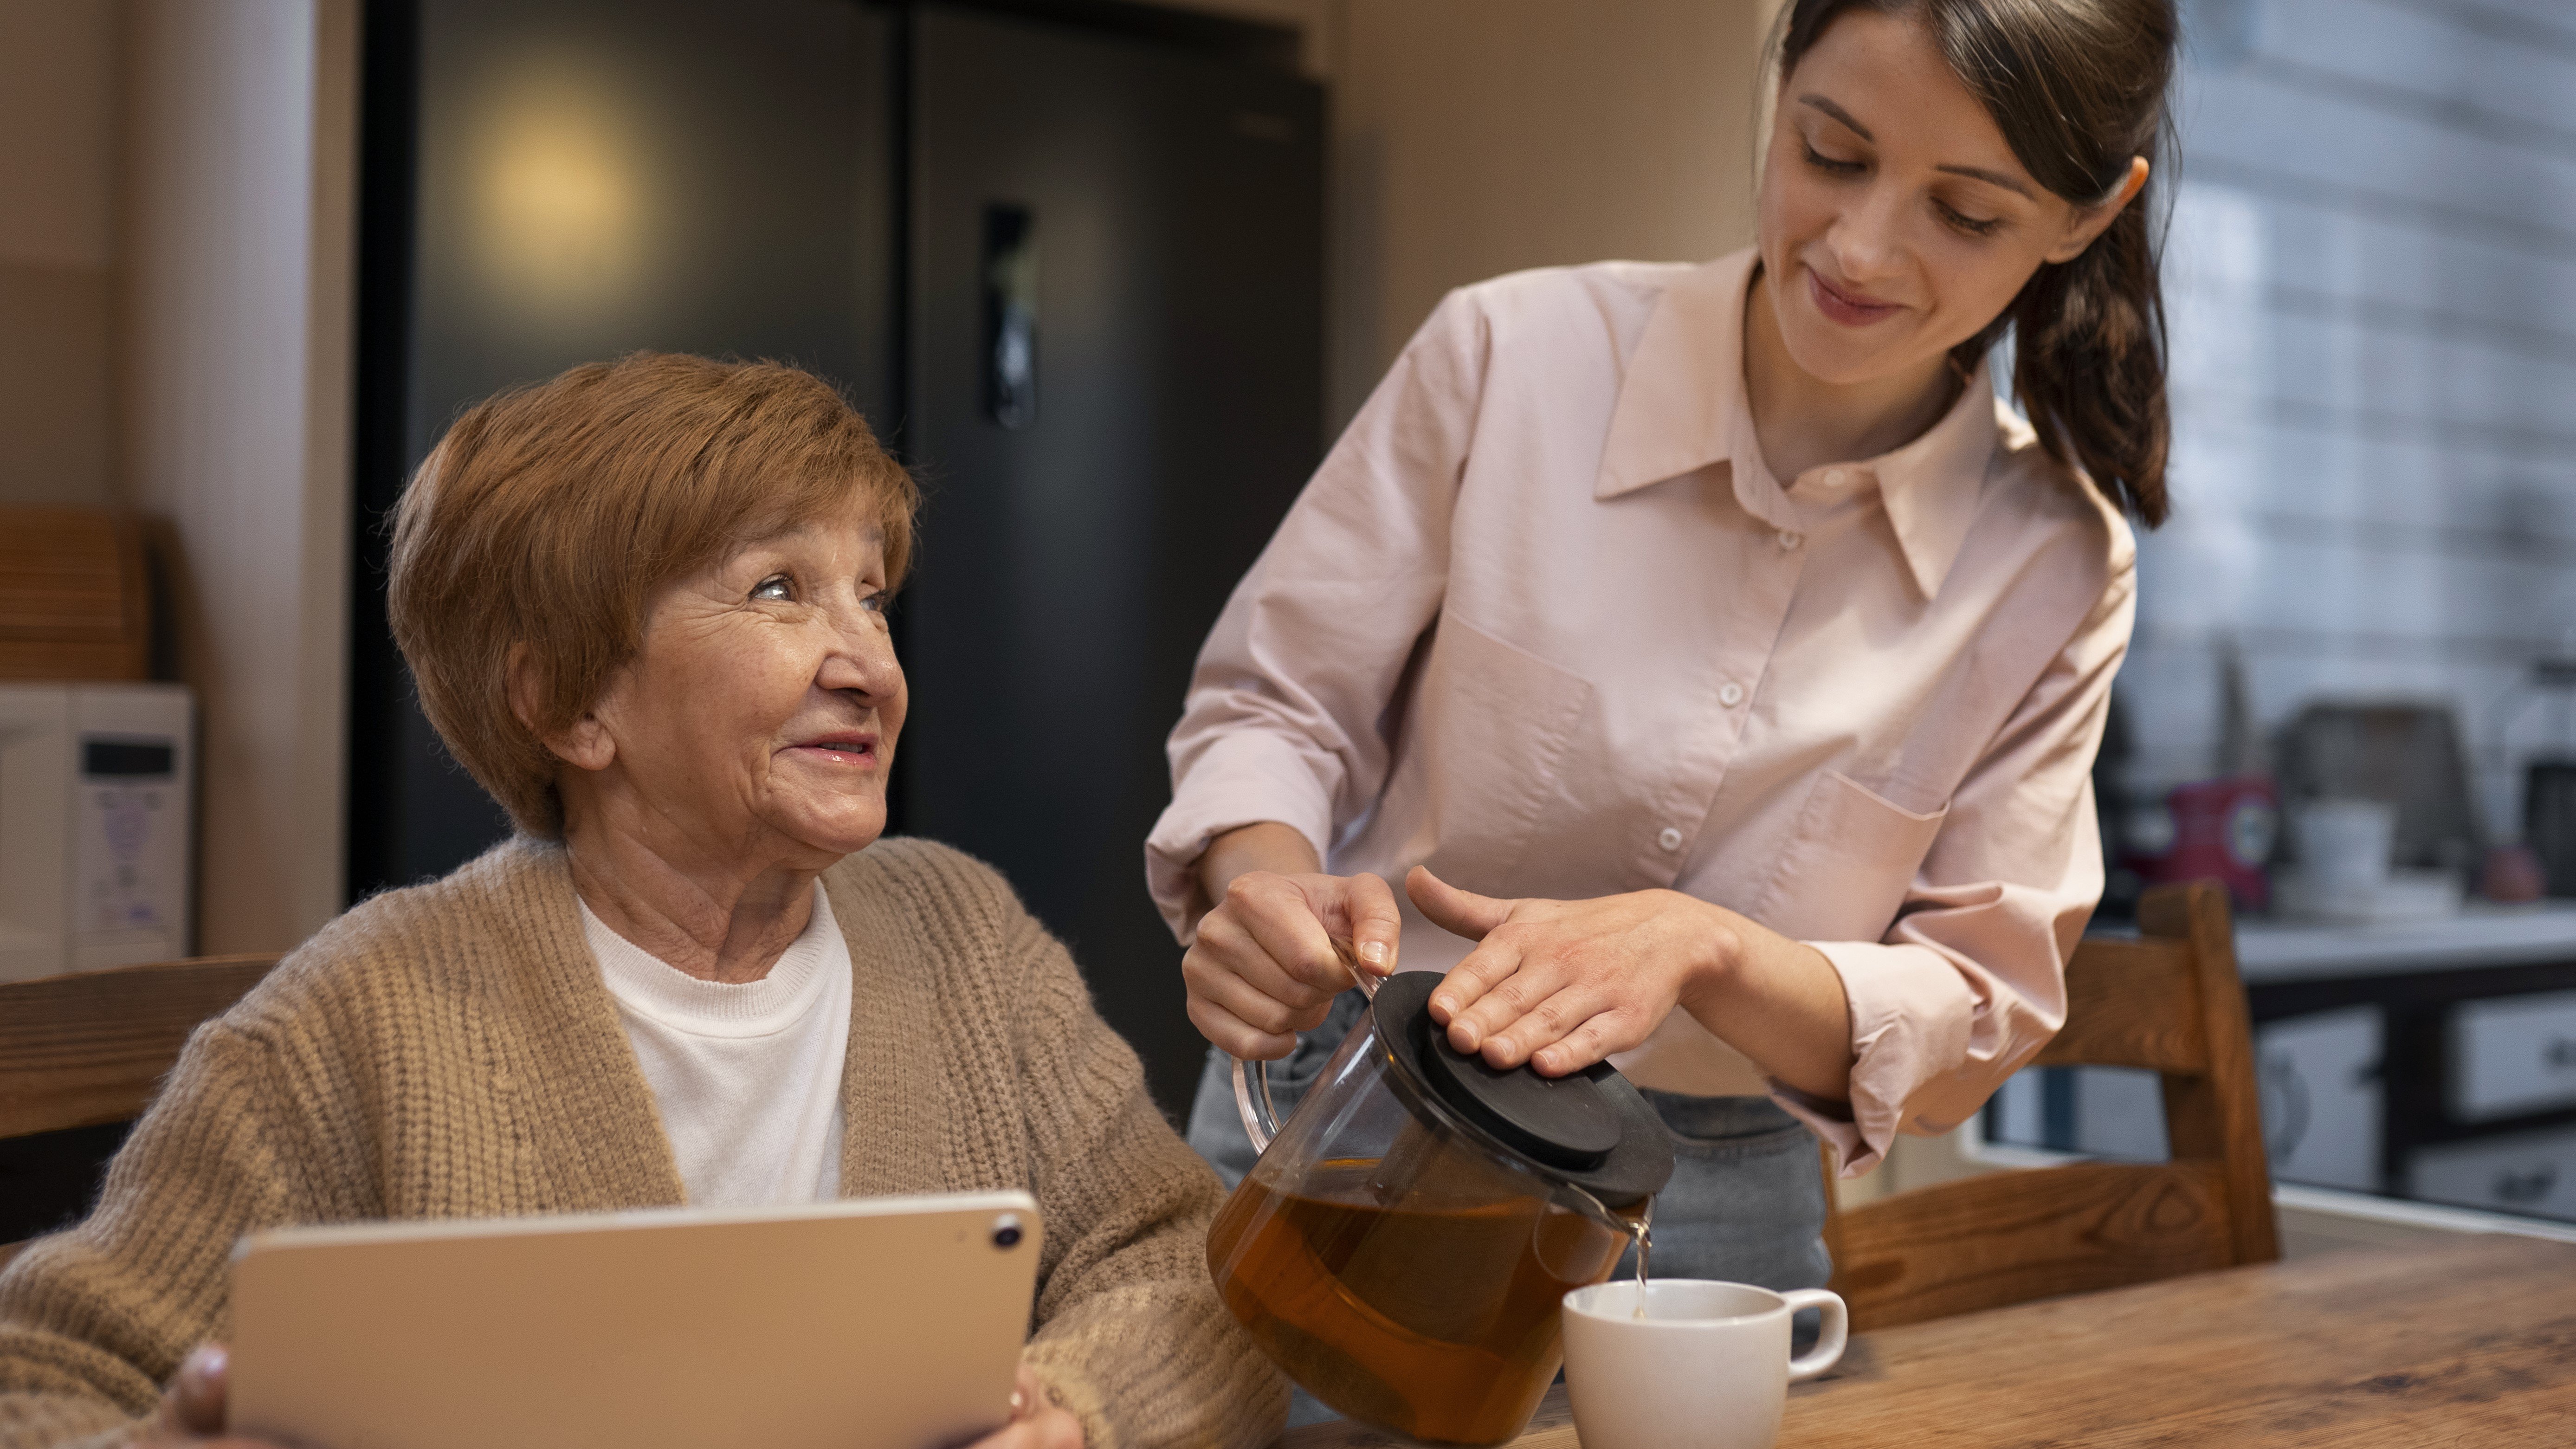 senior woman at computer with caregiver pouring coffee